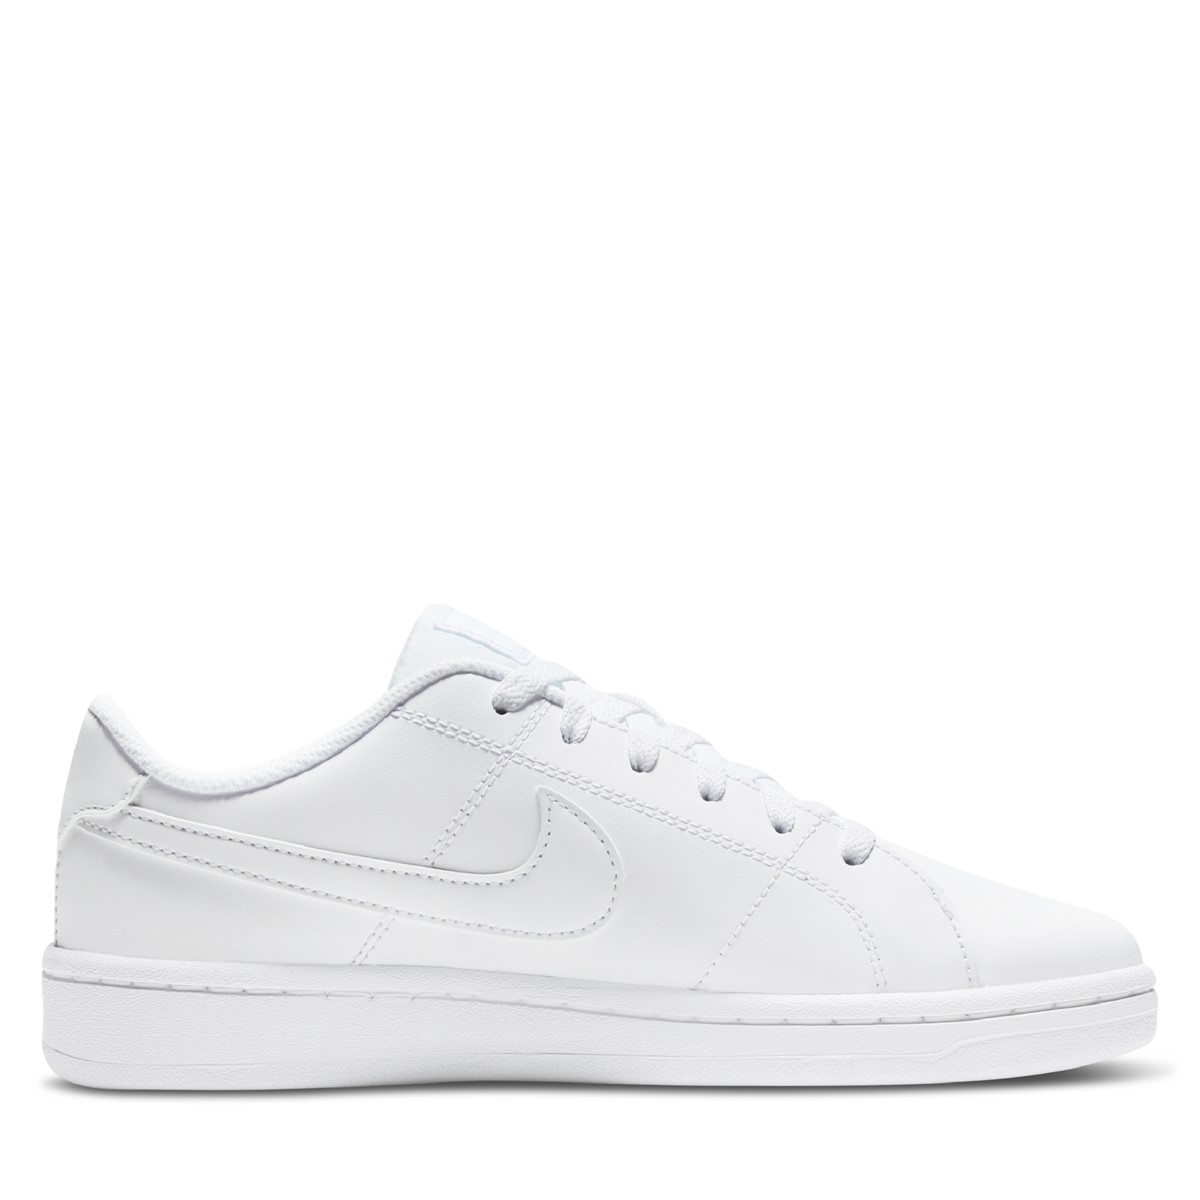 Women's Court Royale 2 Sneakers in White